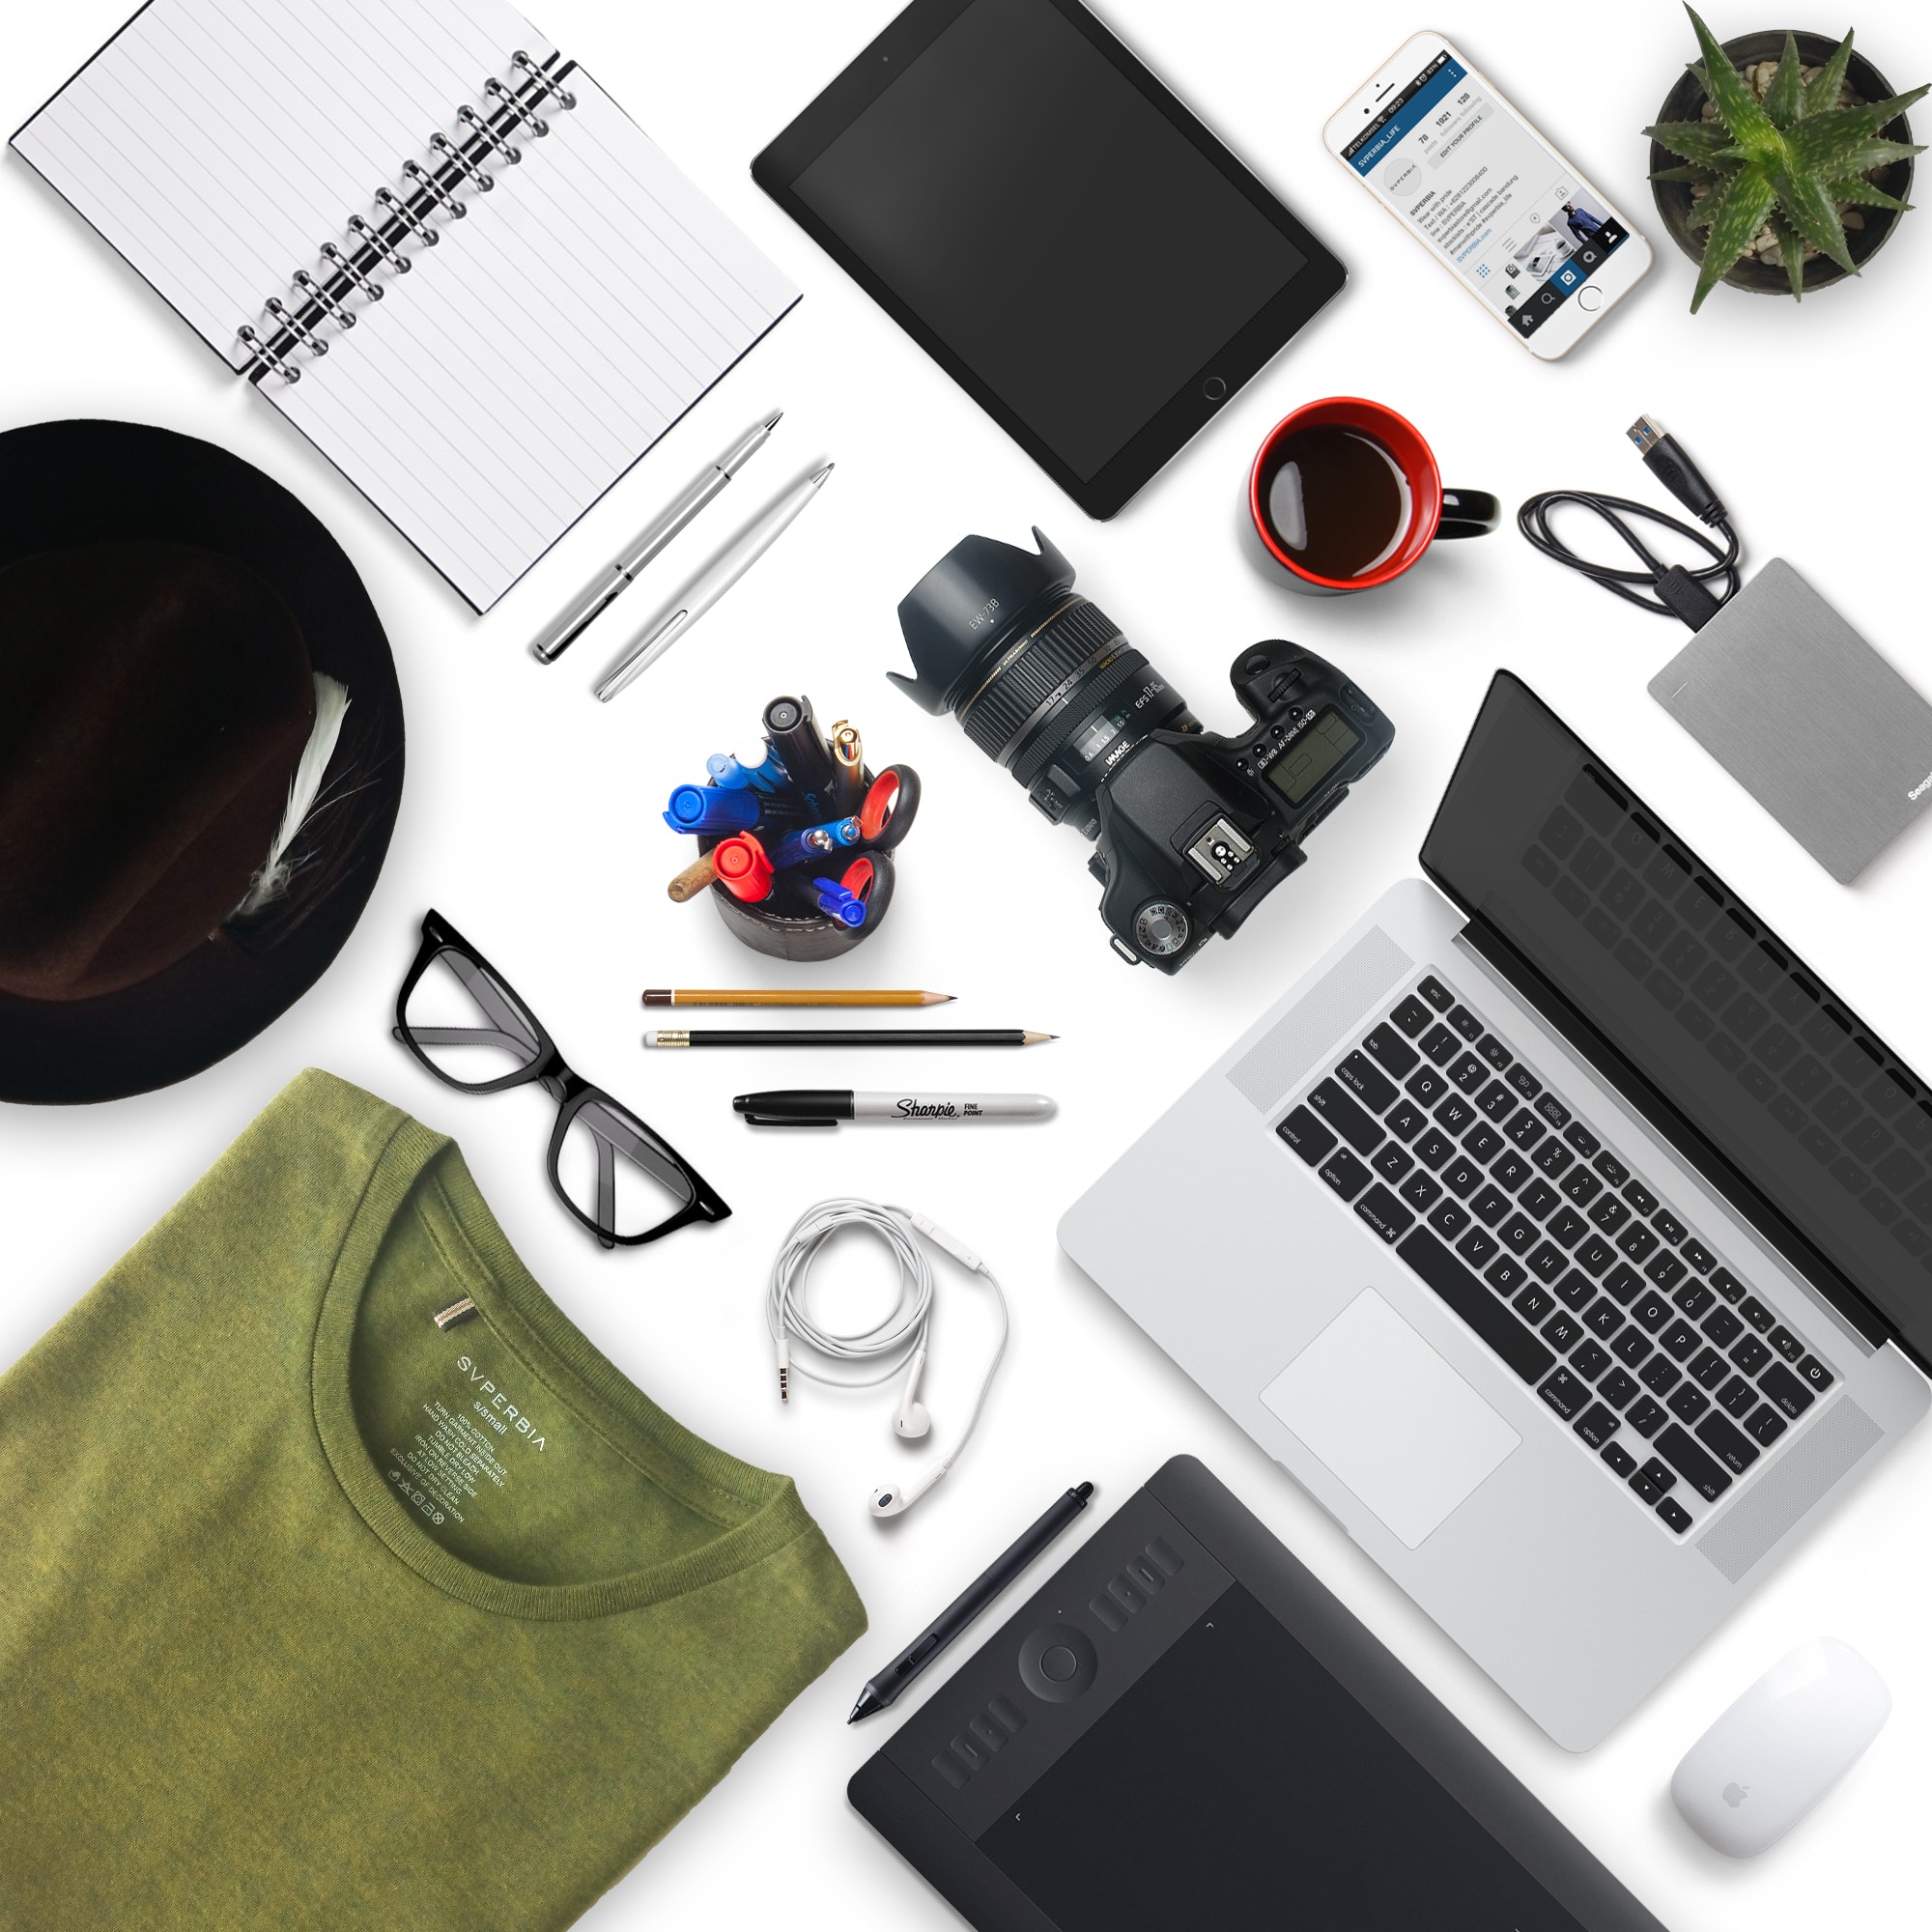 Black and White Laptop Computer, Accessories, Business, Camera, Flatlay, HQ Photo